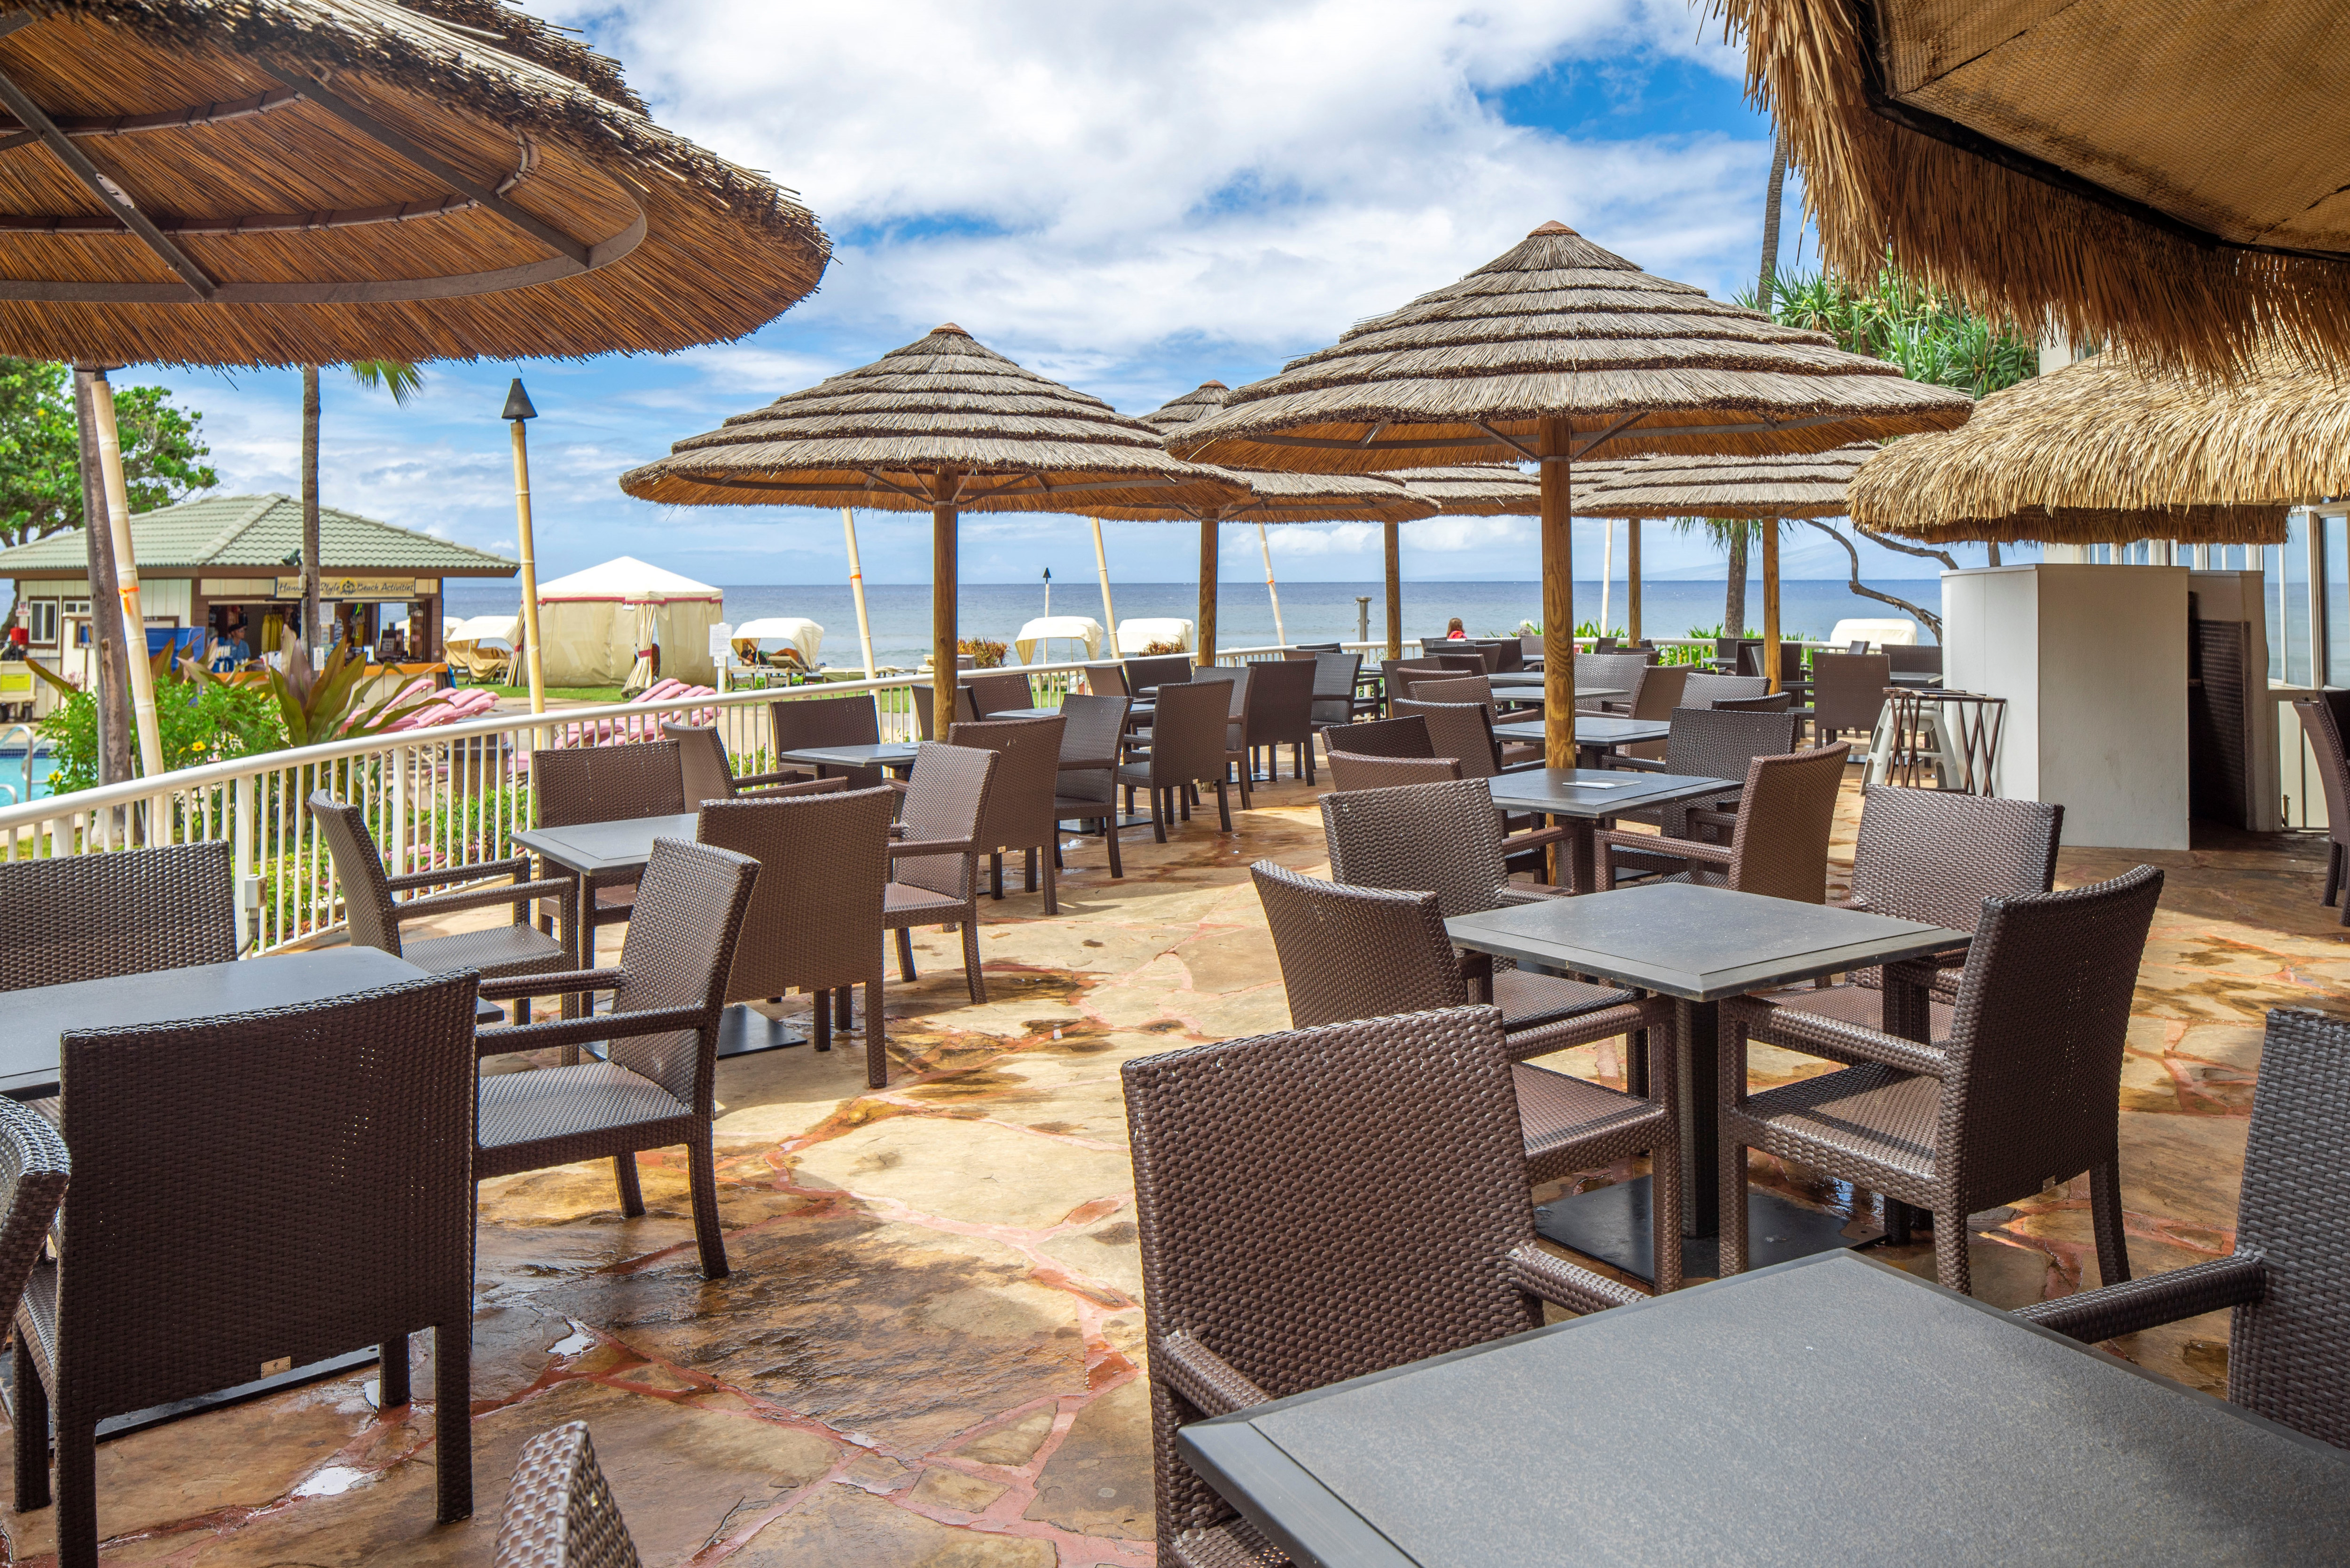 Maui Marketplace Outdoor Seating